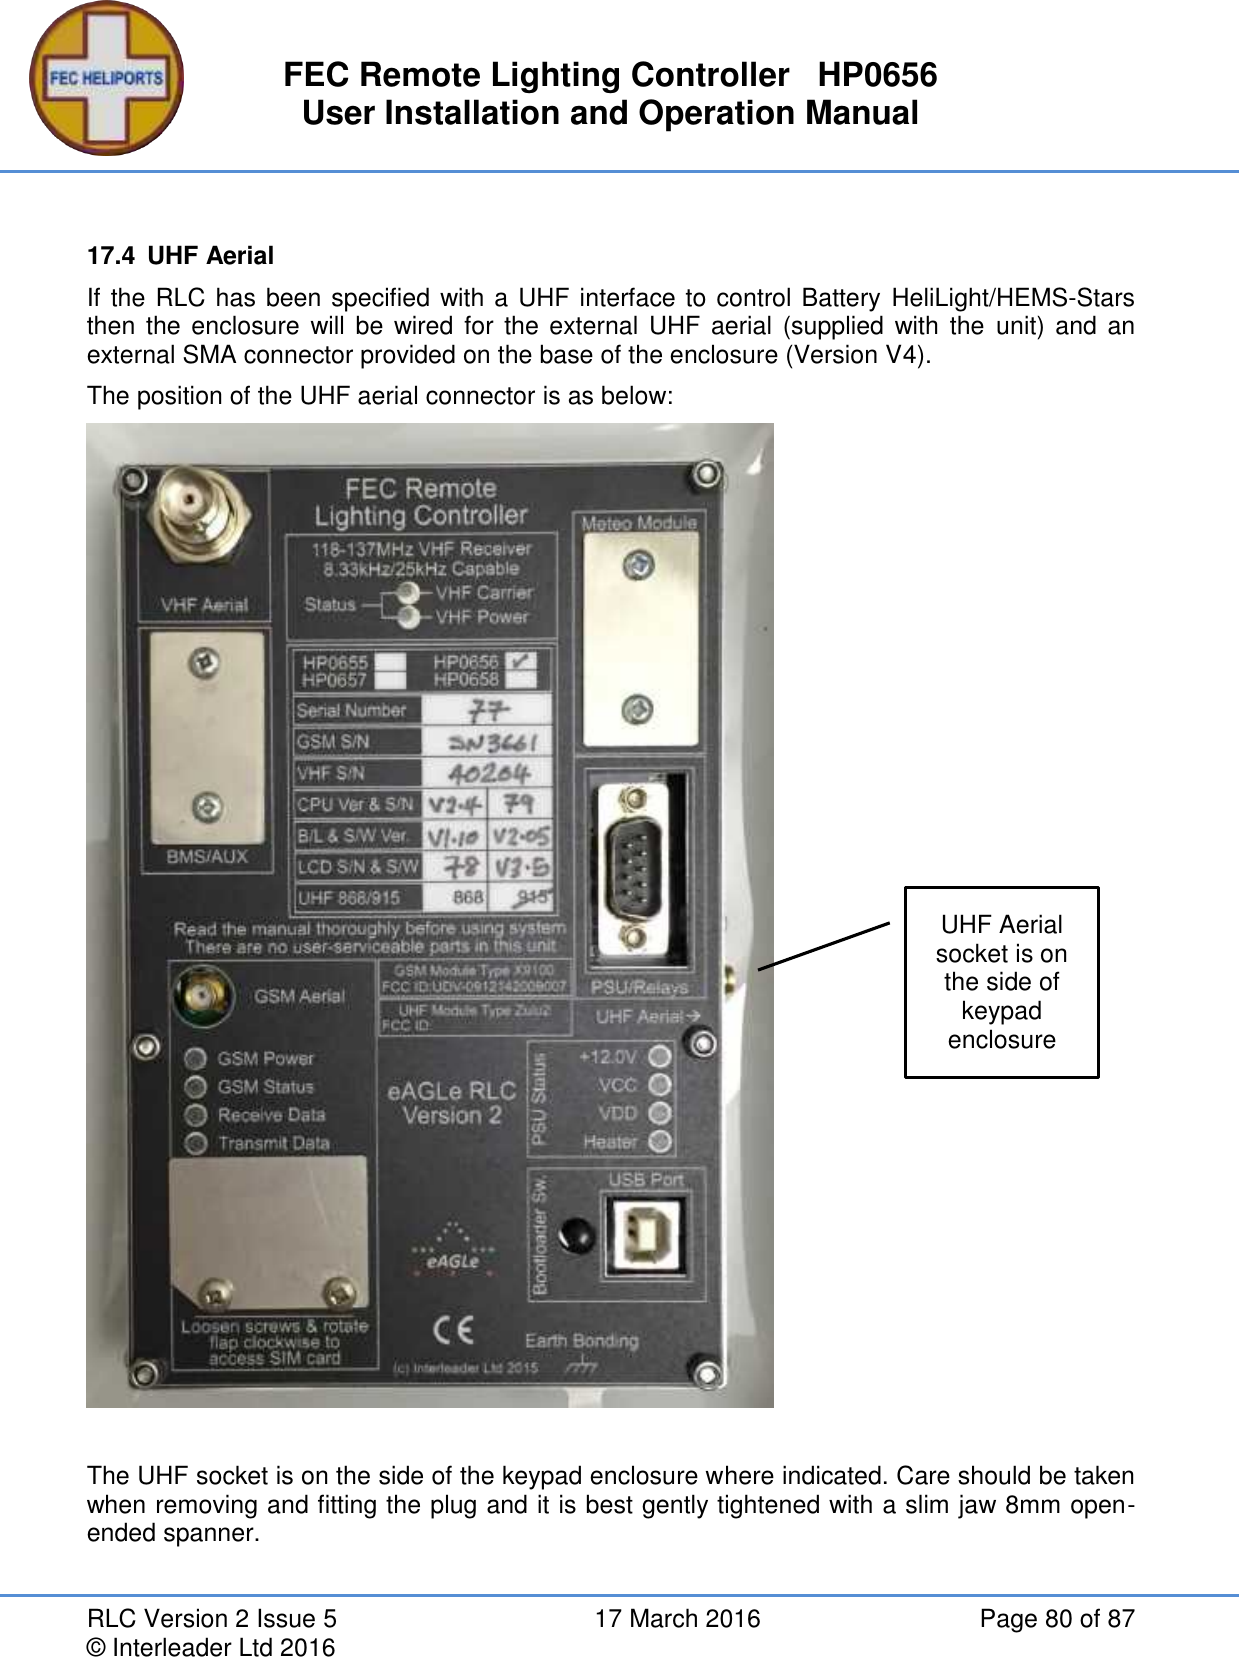 FEC Remote Lighting Controller   HP0656 User Installation and Operation Manual RLC Version 2 Issue 5  17 March 2016  Page 80 of 87 © Interleader Ltd 2016  17.4  UHF Aerial If the RLC has been specified with a UHF interface to control Battery HeliLight/HEMS-Stars then the enclosure  will  be wired for  the external UHF aerial  (supplied  with the  unit) and  an external SMA connector provided on the base of the enclosure (Version V4). The position of the UHF aerial connector is as below:   The UHF socket is on the side of the keypad enclosure where indicated. Care should be taken when removing and fitting the plug and it is best gently tightened with a slim jaw 8mm open-ended spanner.   UHF Aerial socket is on the side of keypad enclosure 